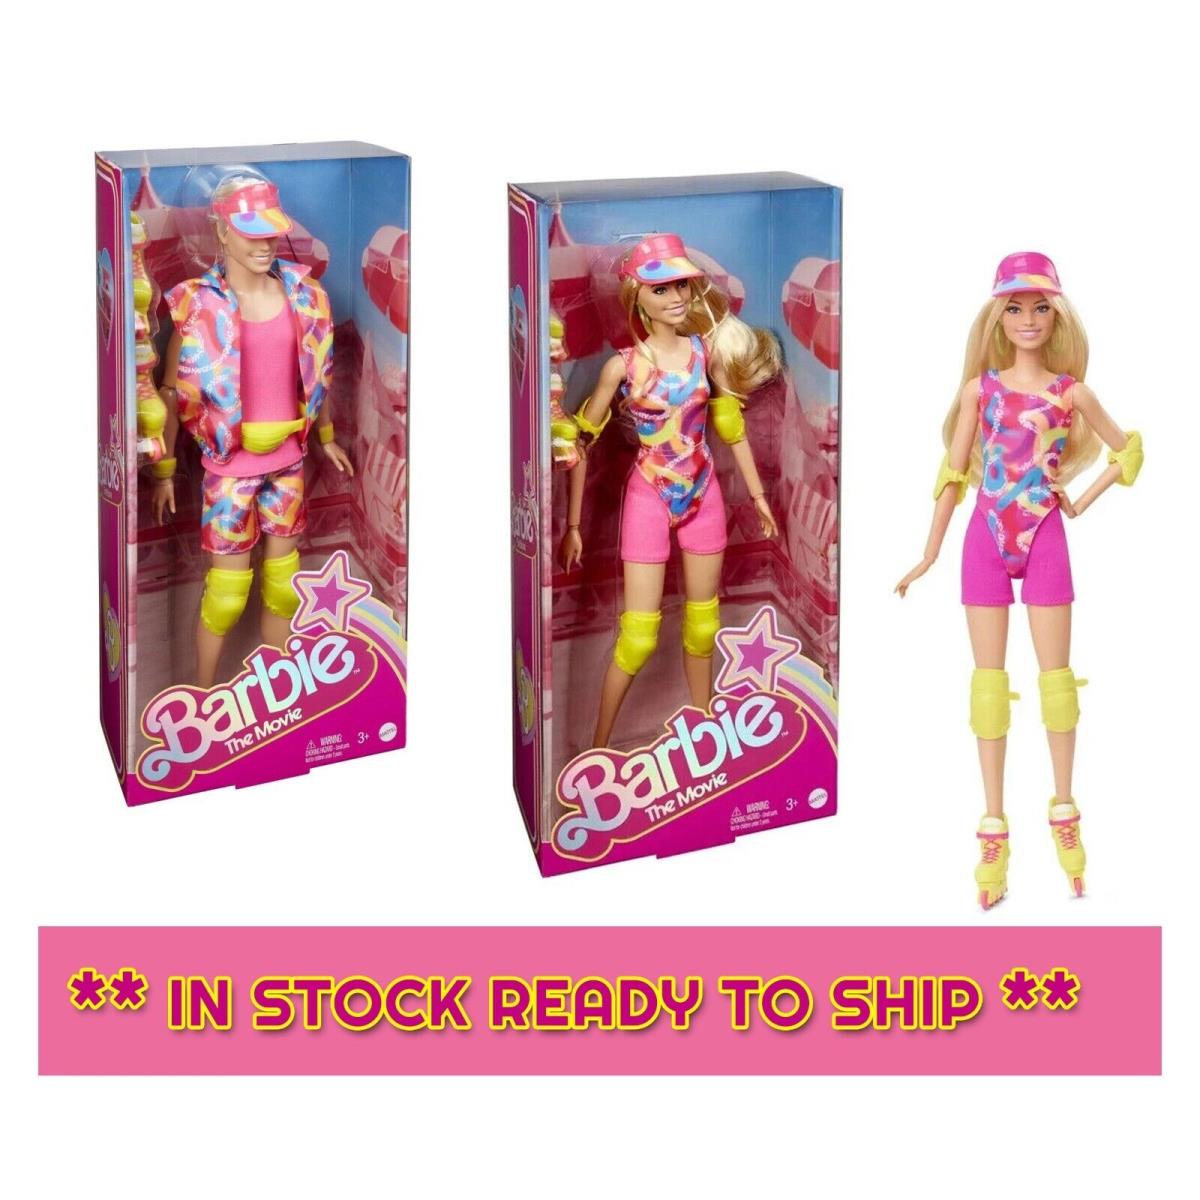 Barbie + Ken The Movie Collectible Doll Margot Robbie Inline Skating Outfit 2 PK